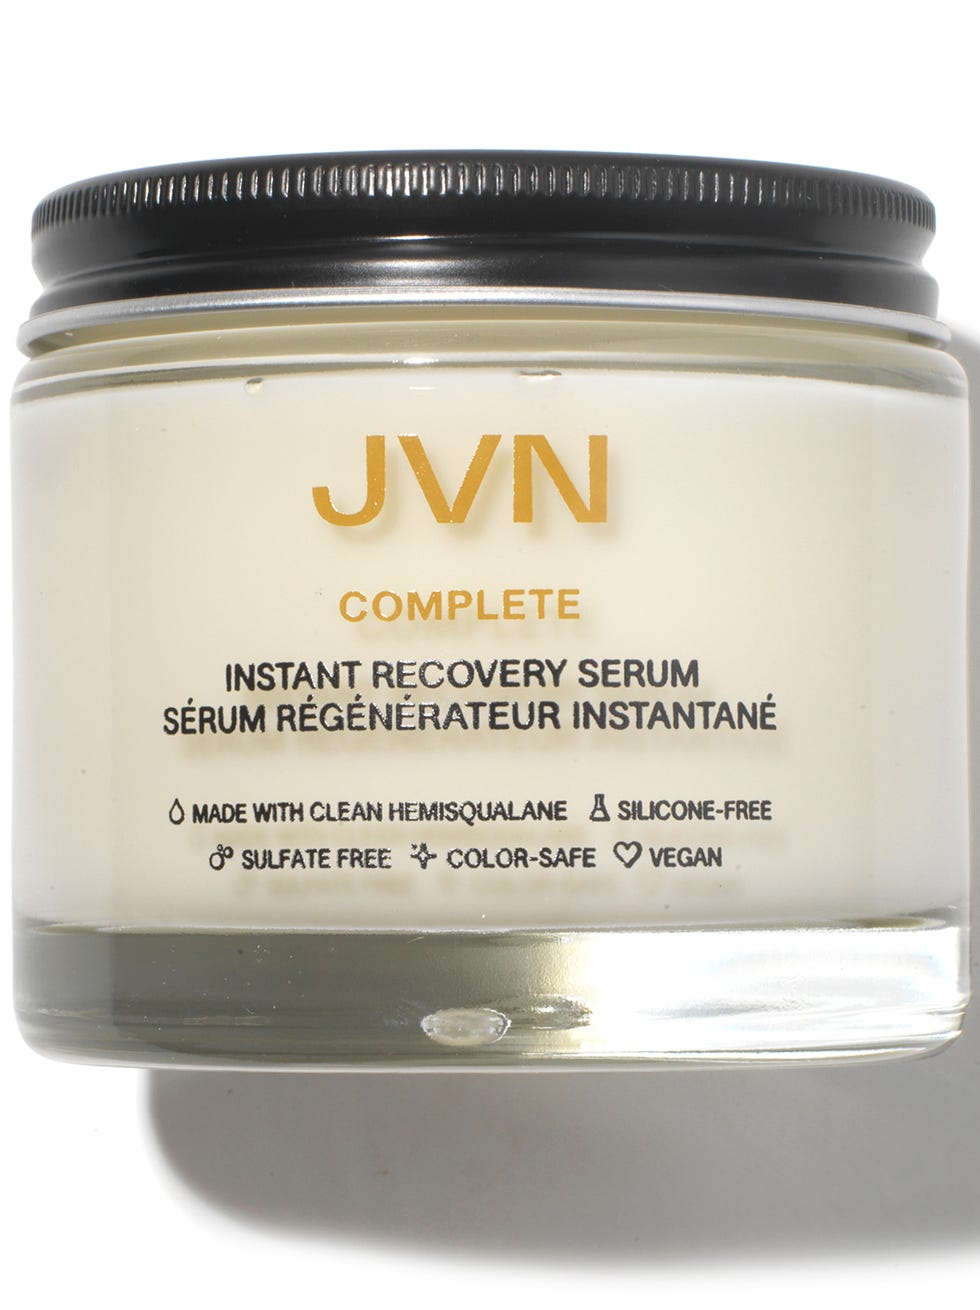 Complete Instant Recovery Serum